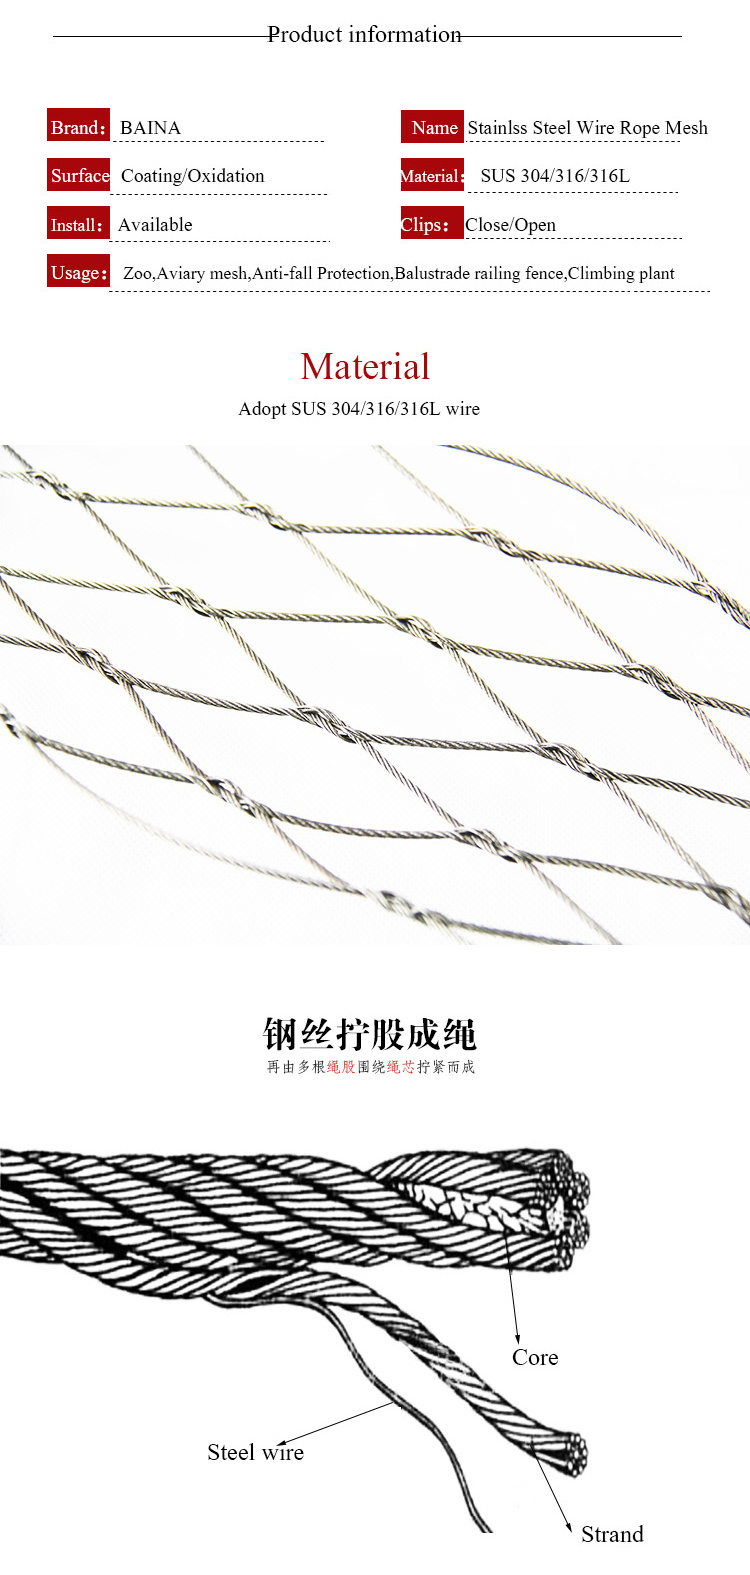 Hand Woven Stainless Steel Cable Mesh / Stainless Steel Screen Mesh / Stainless Steel Rope Mesh Fence